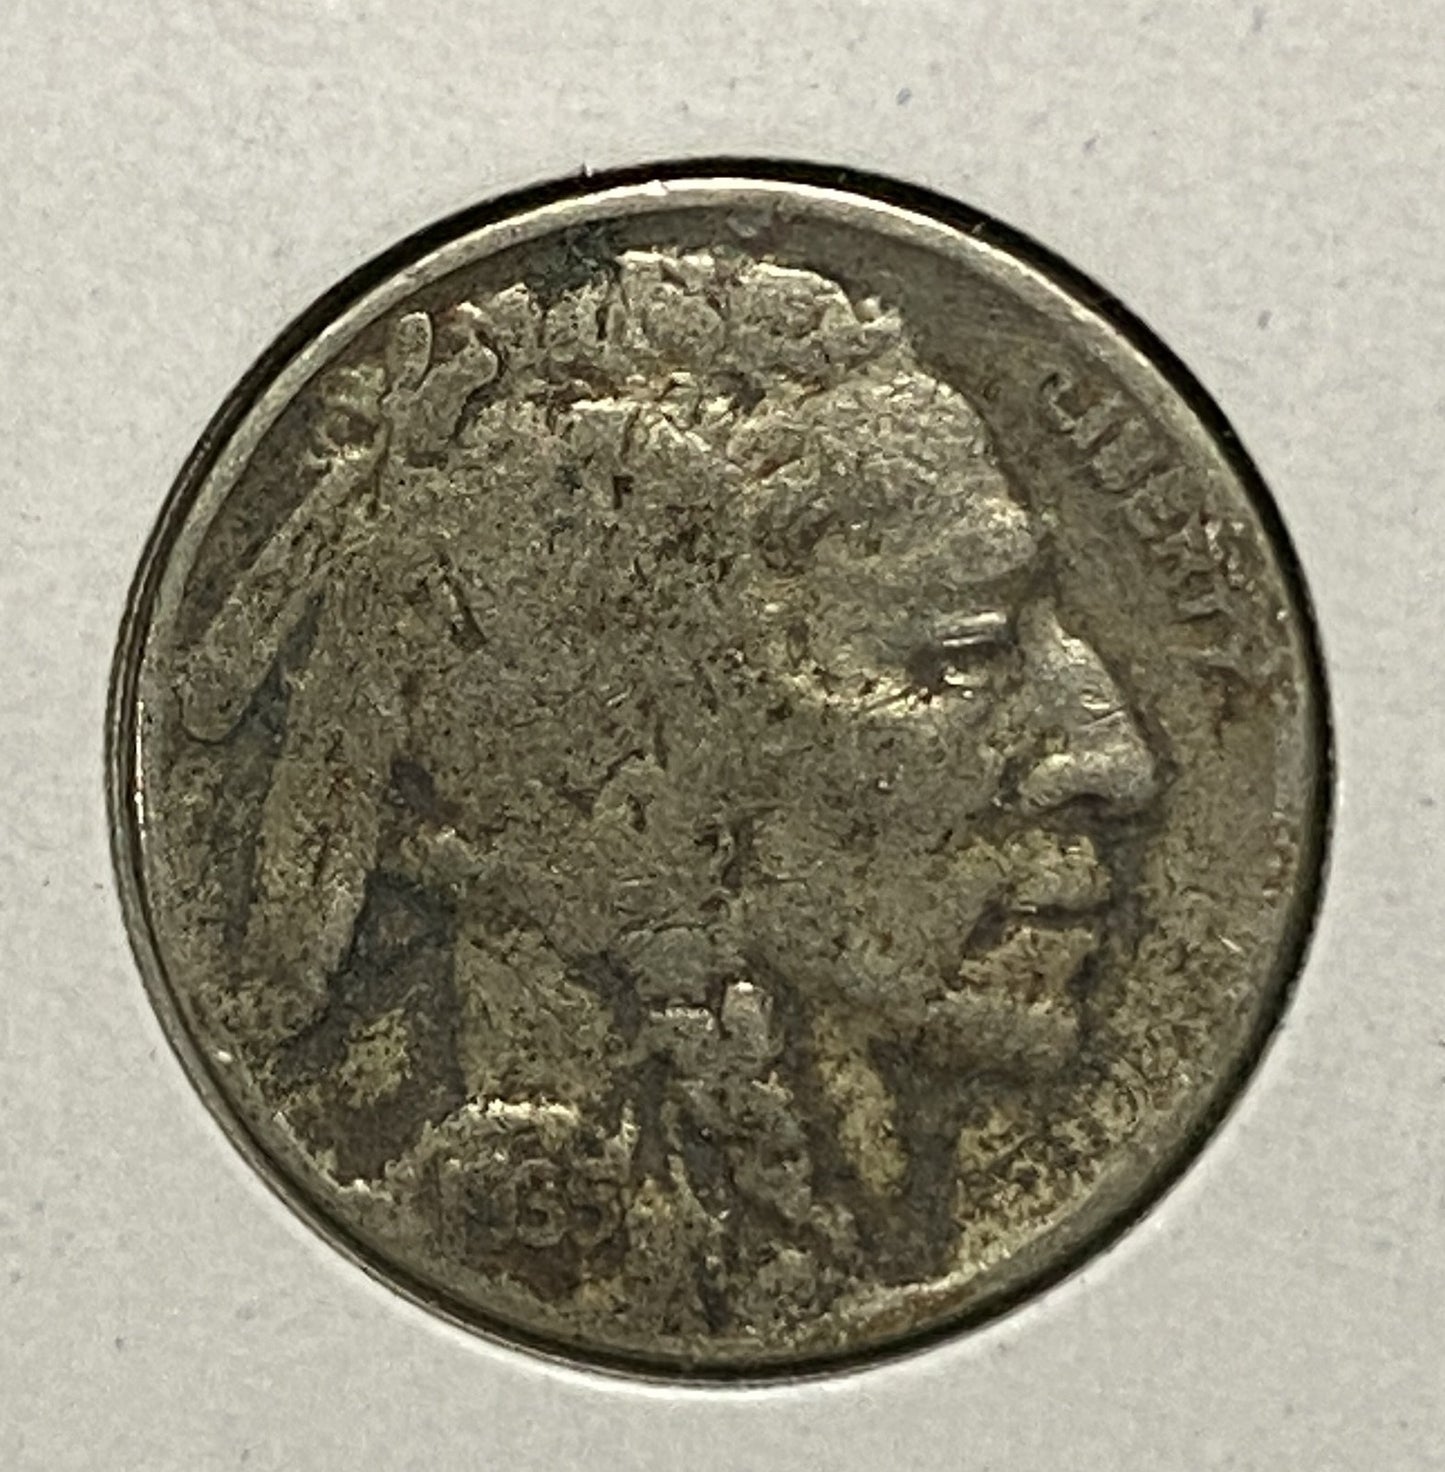 UNITED STATES BUFFALO NICKEL 1935 G/G+ 5 CENT COIN